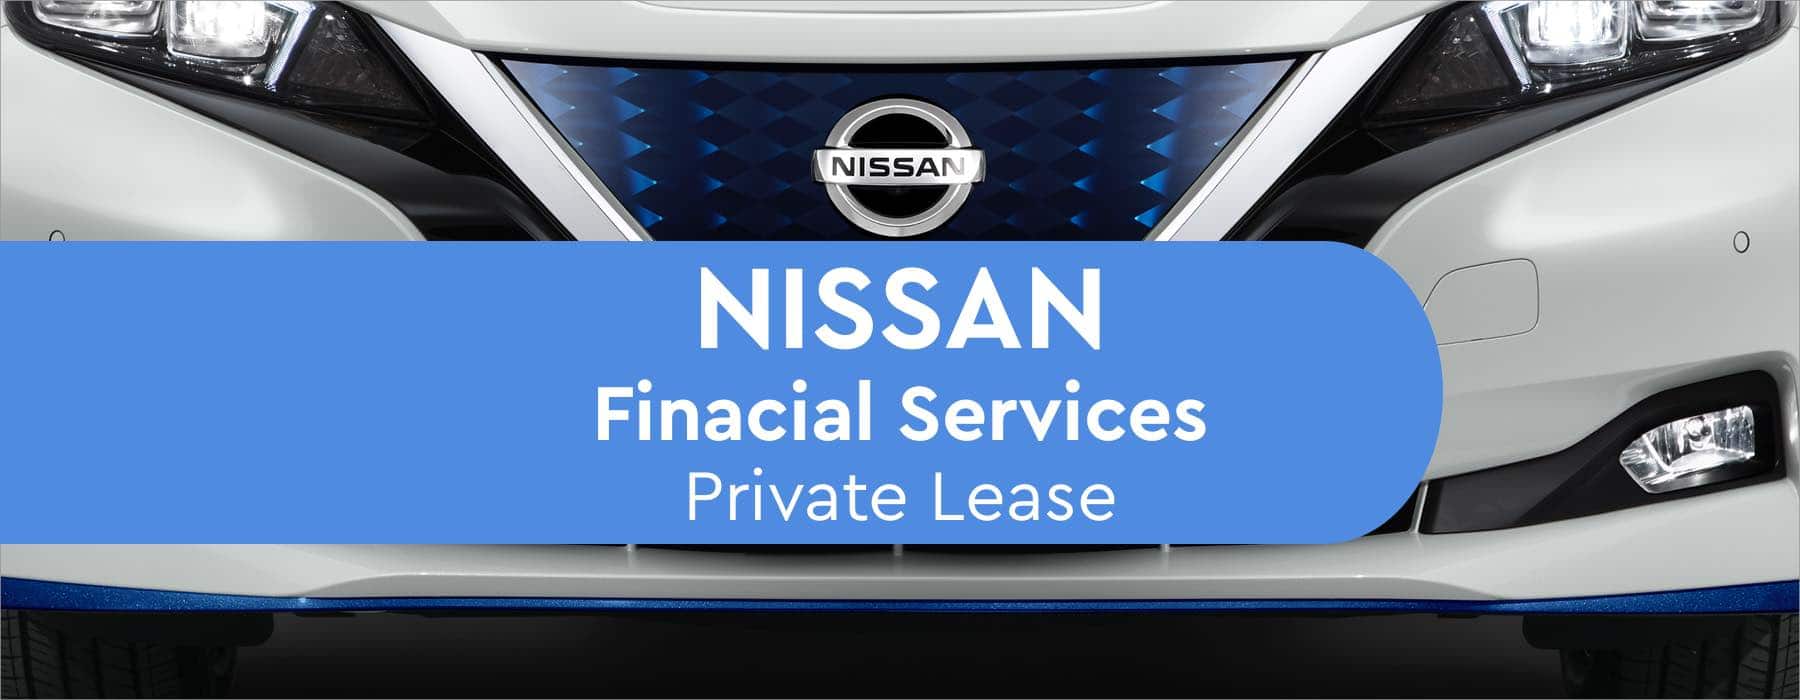 nissan financial services Private Lease